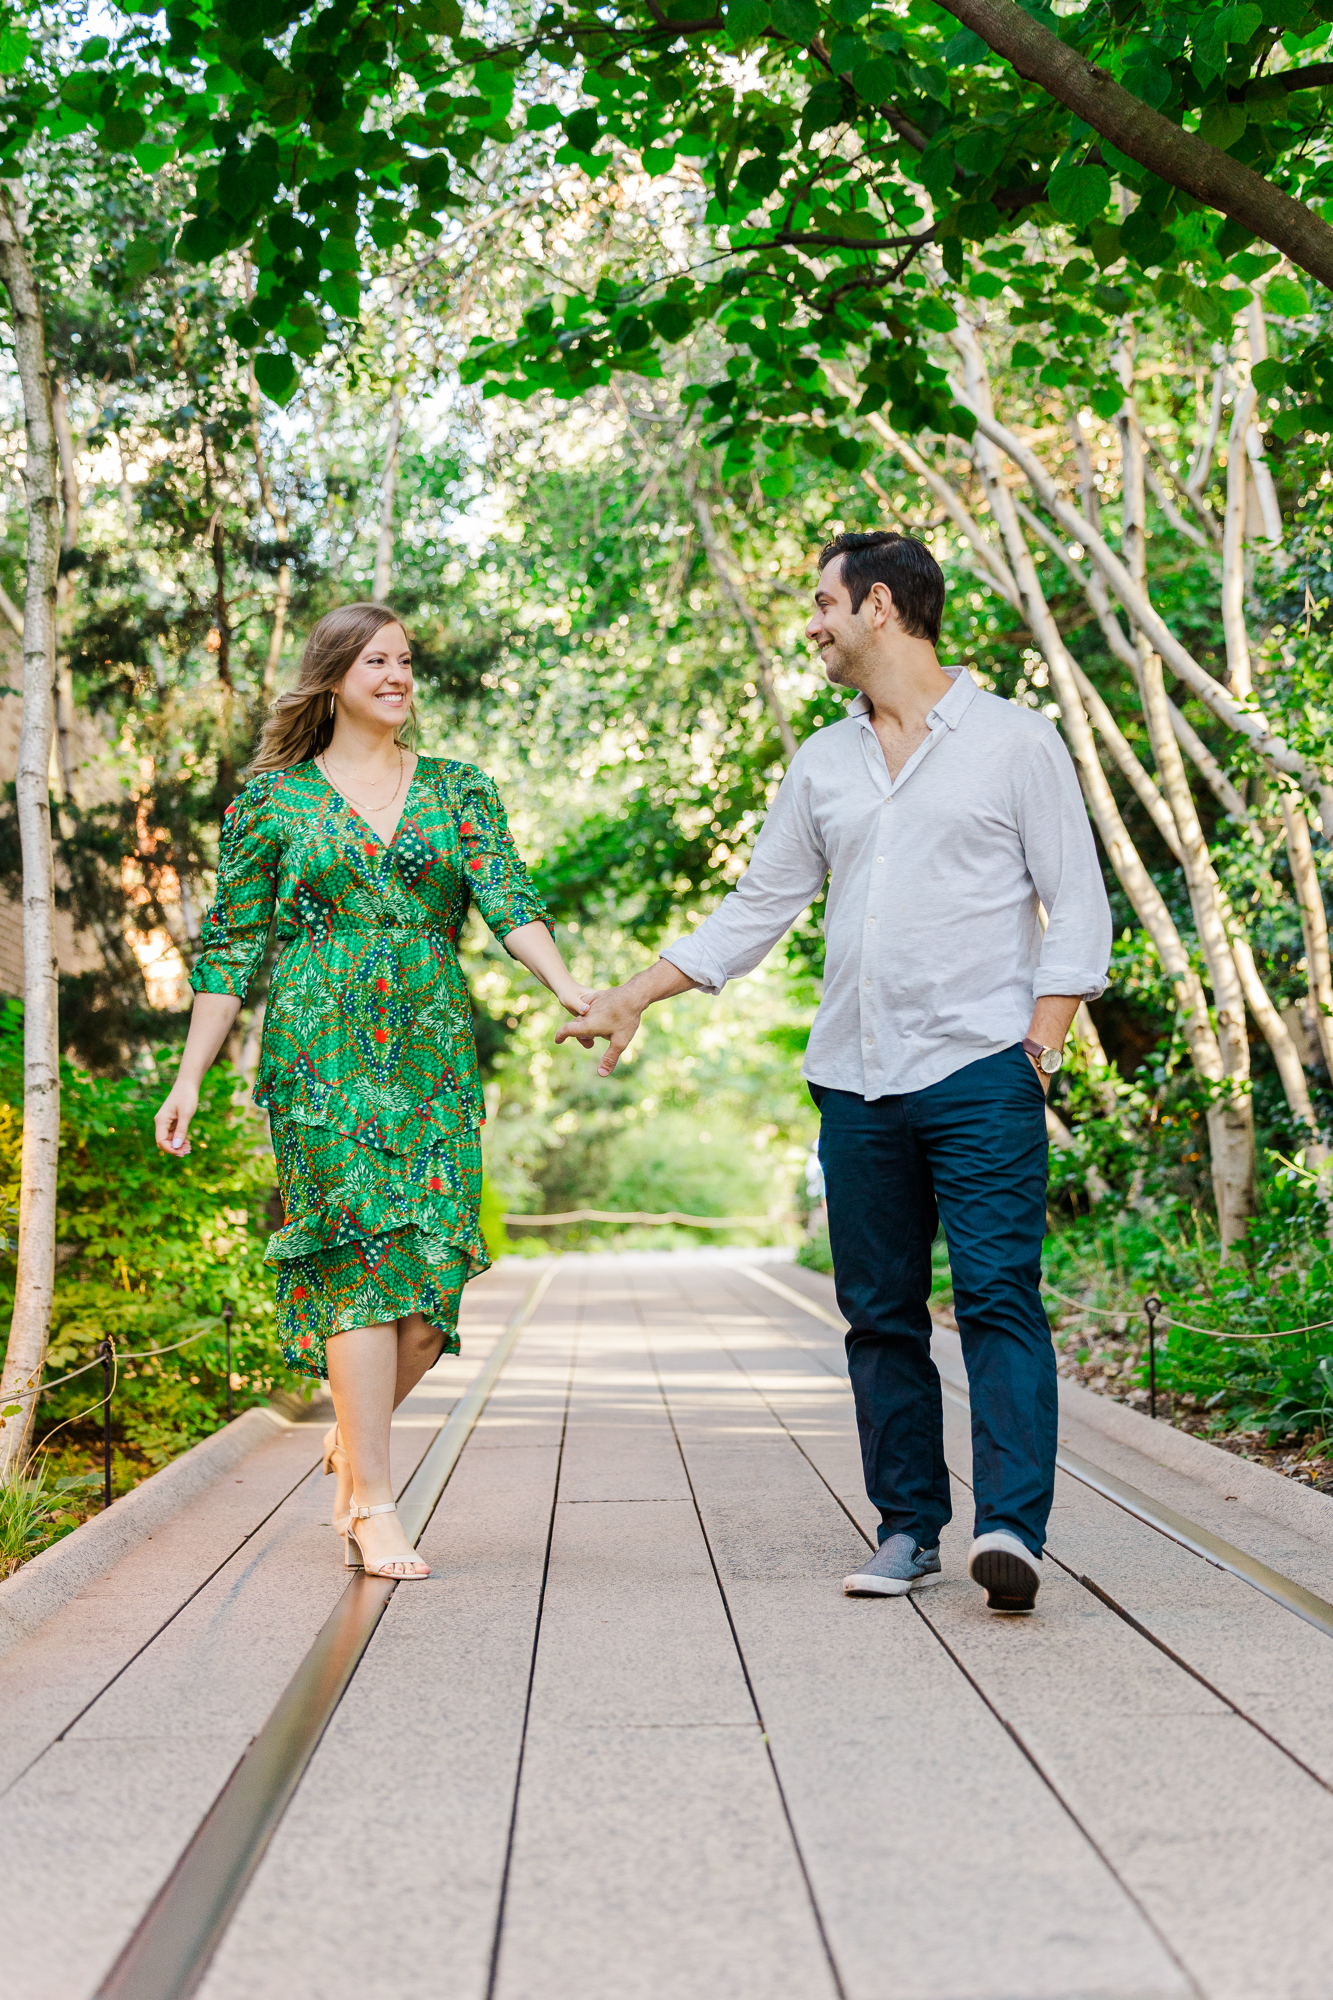 Vibrant Summer High Line Engagement Photography in the West Village